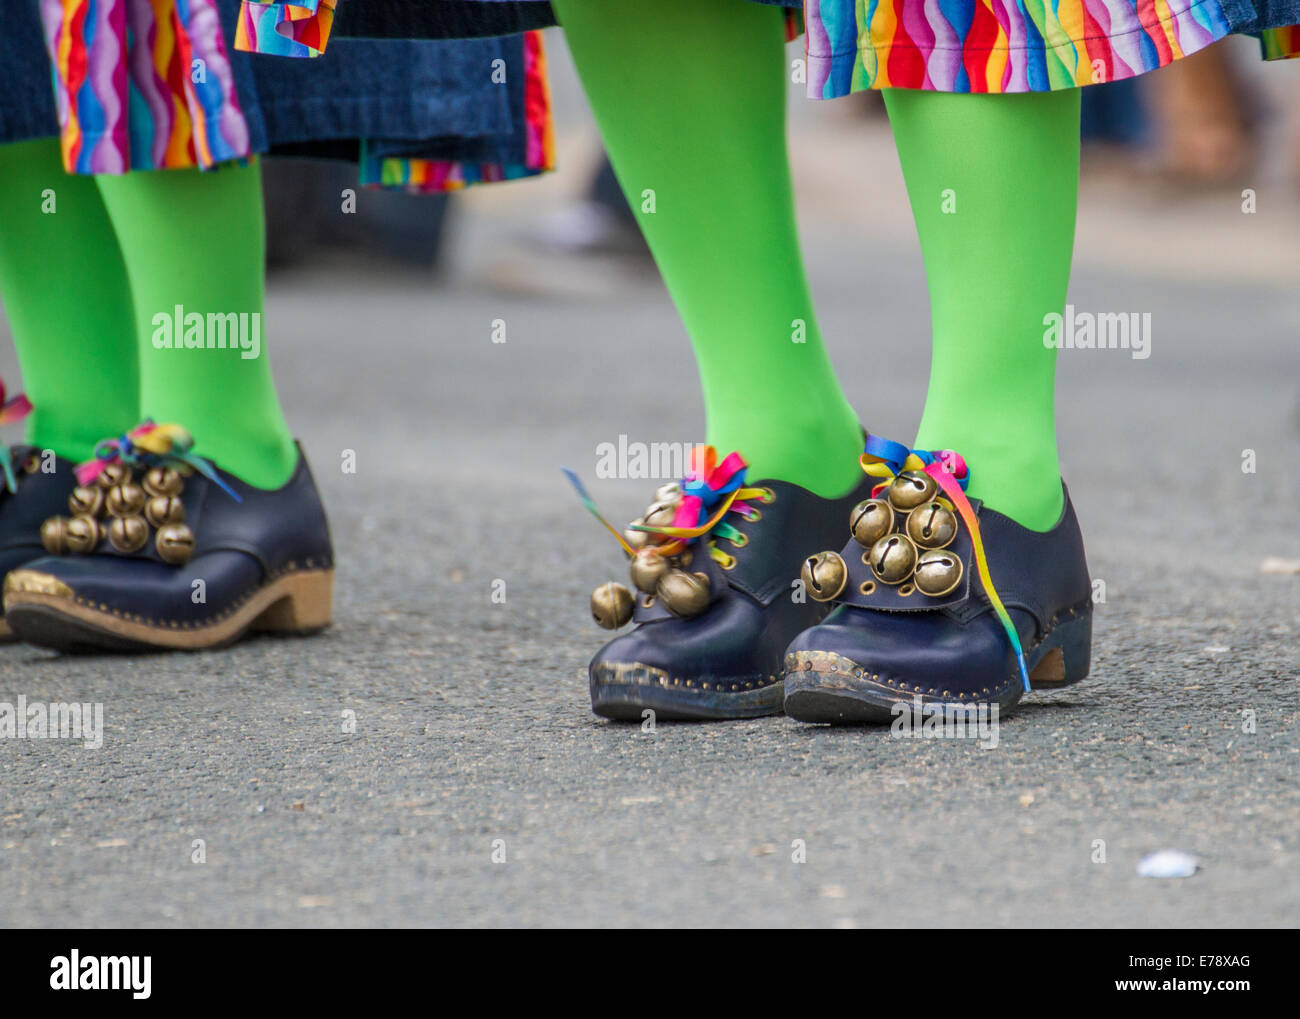 Folk festival black shoes with green tights and bells on with colourful colorful outfits in Swanage, Purbeck, Dorset, England Stock Photo